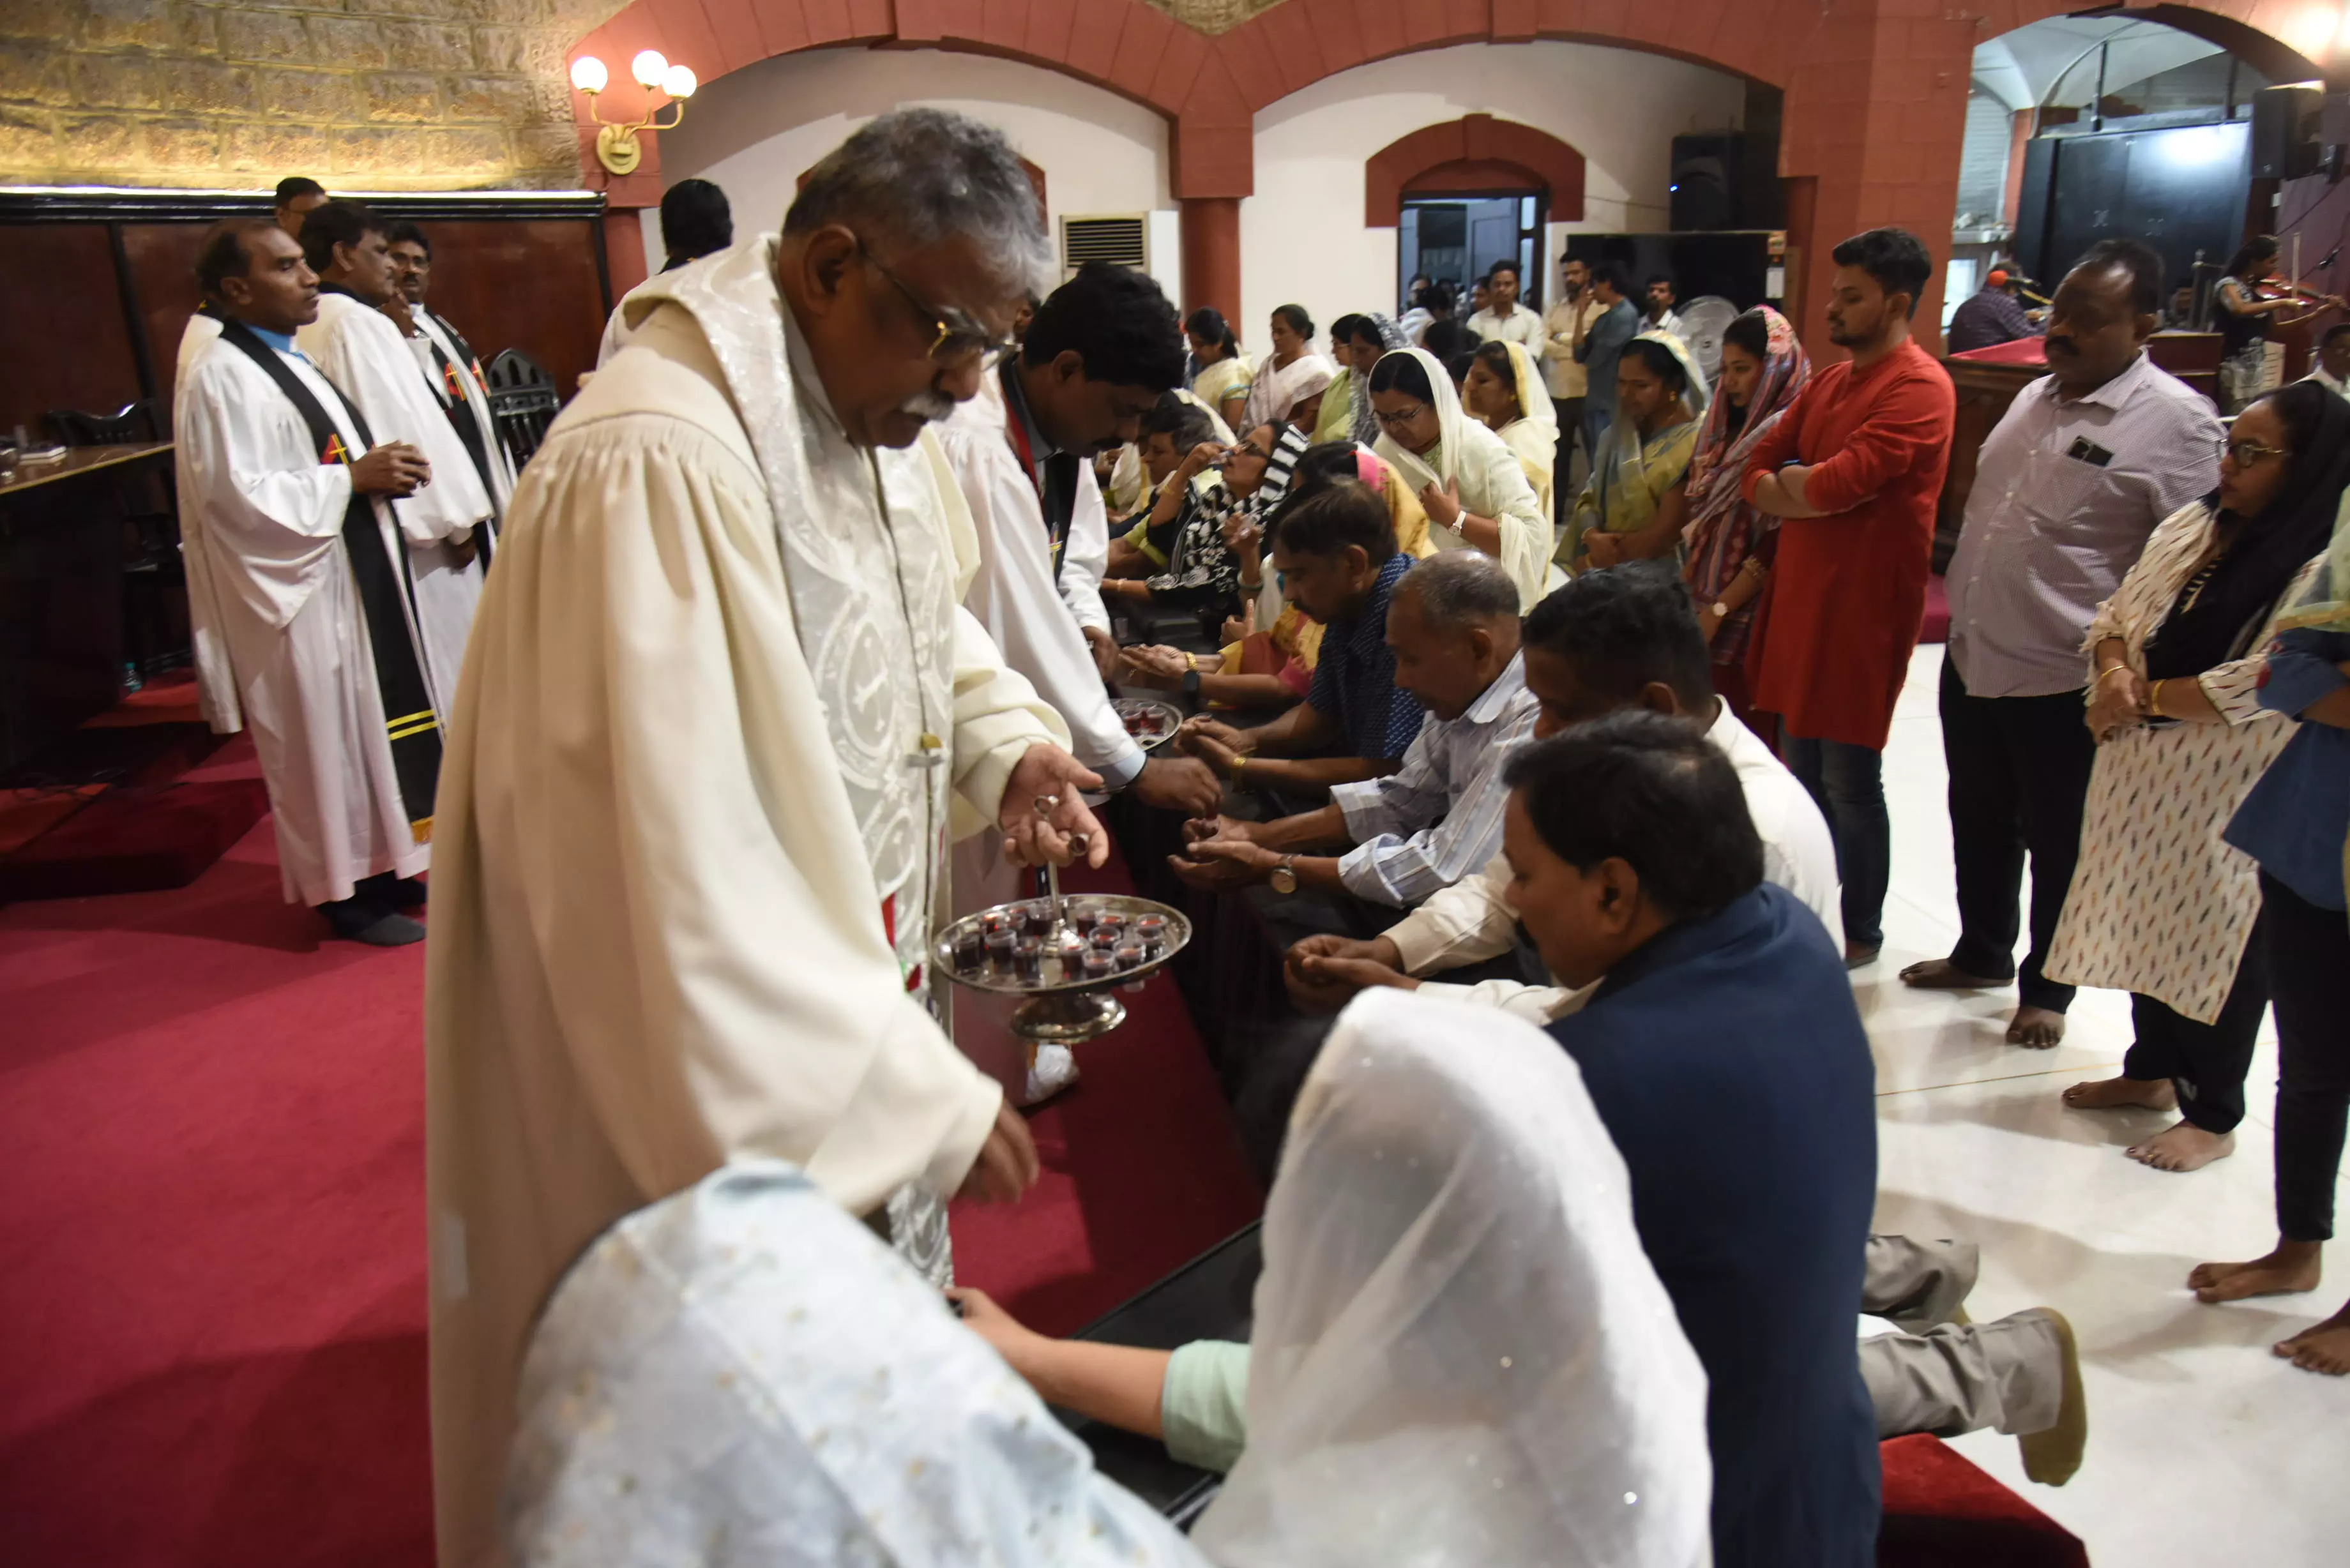 Heavy turnout of faithful at all churches for Maundy Thursday